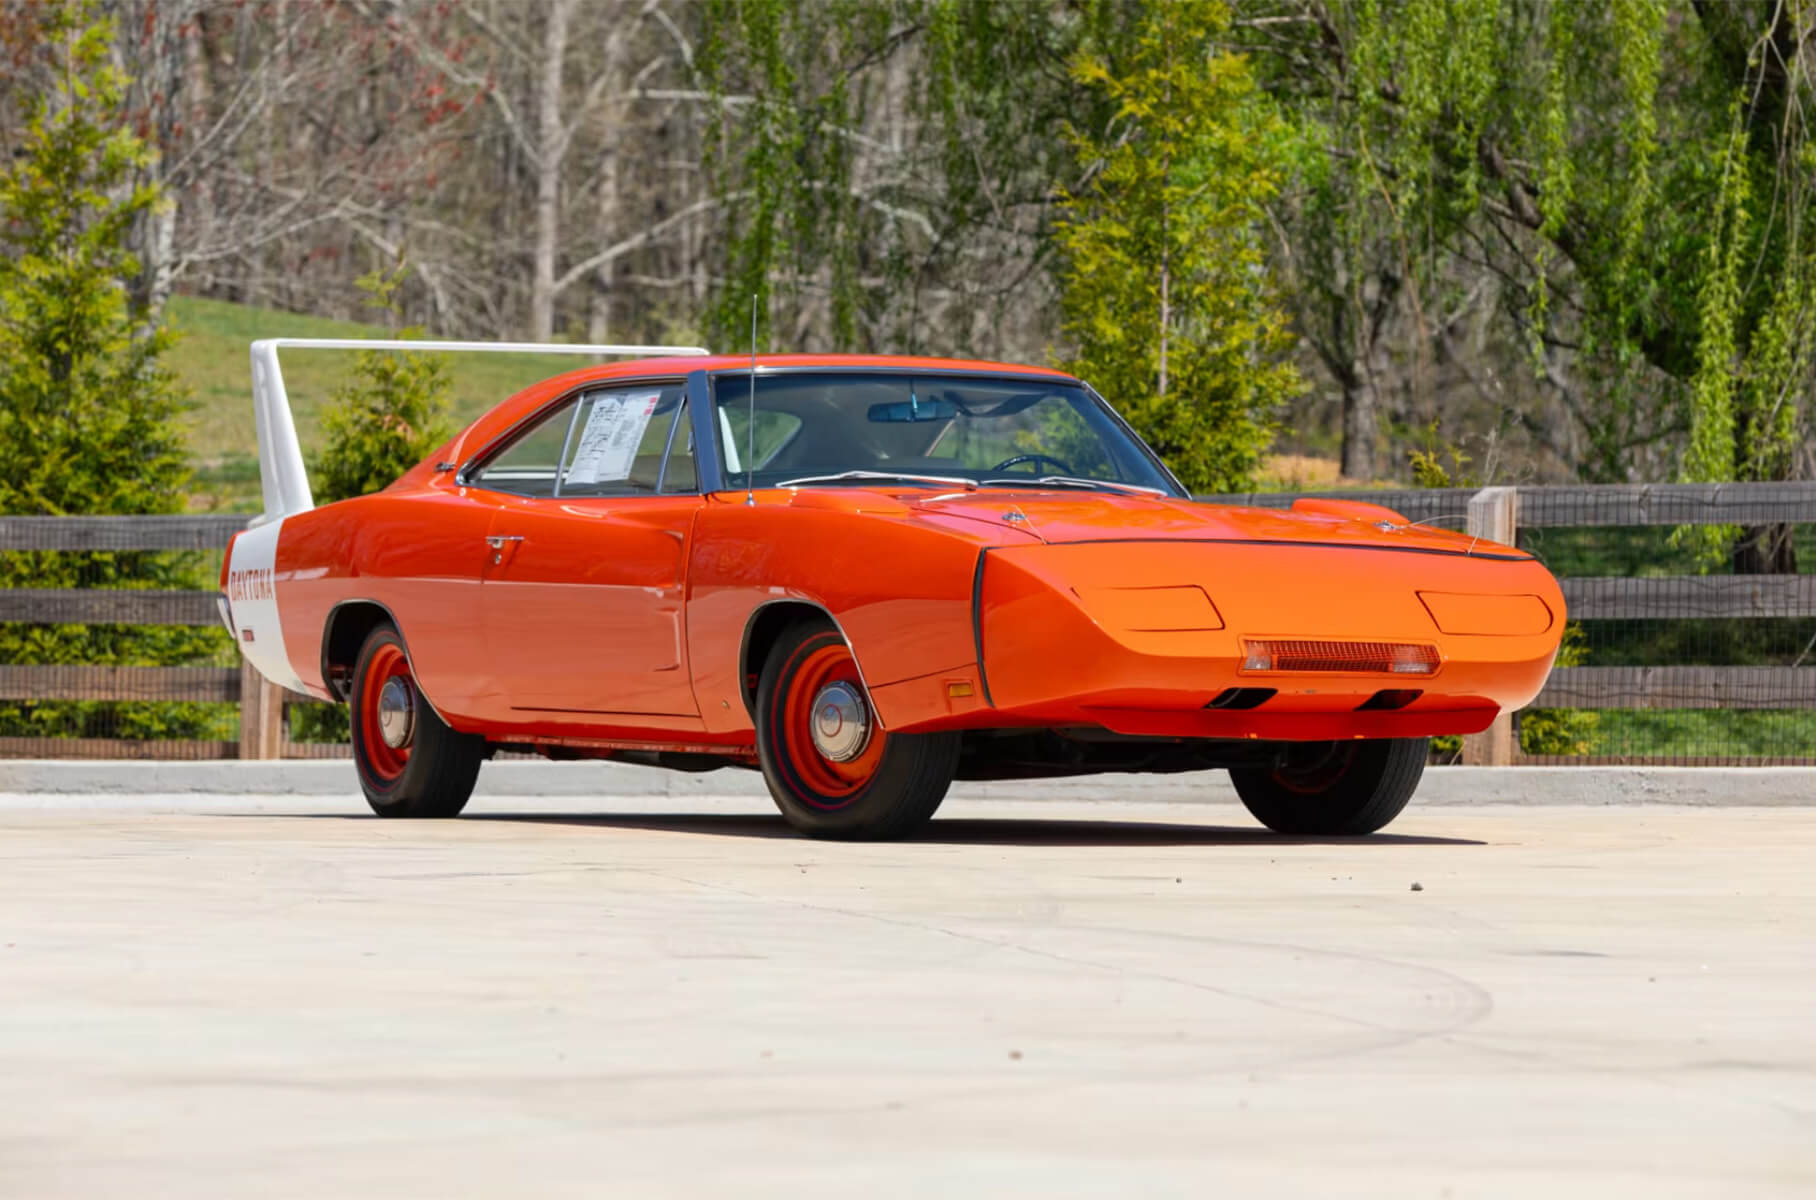 The famous 1969 Dodge Charger Daytona muscle car will be sold at Mecum auction